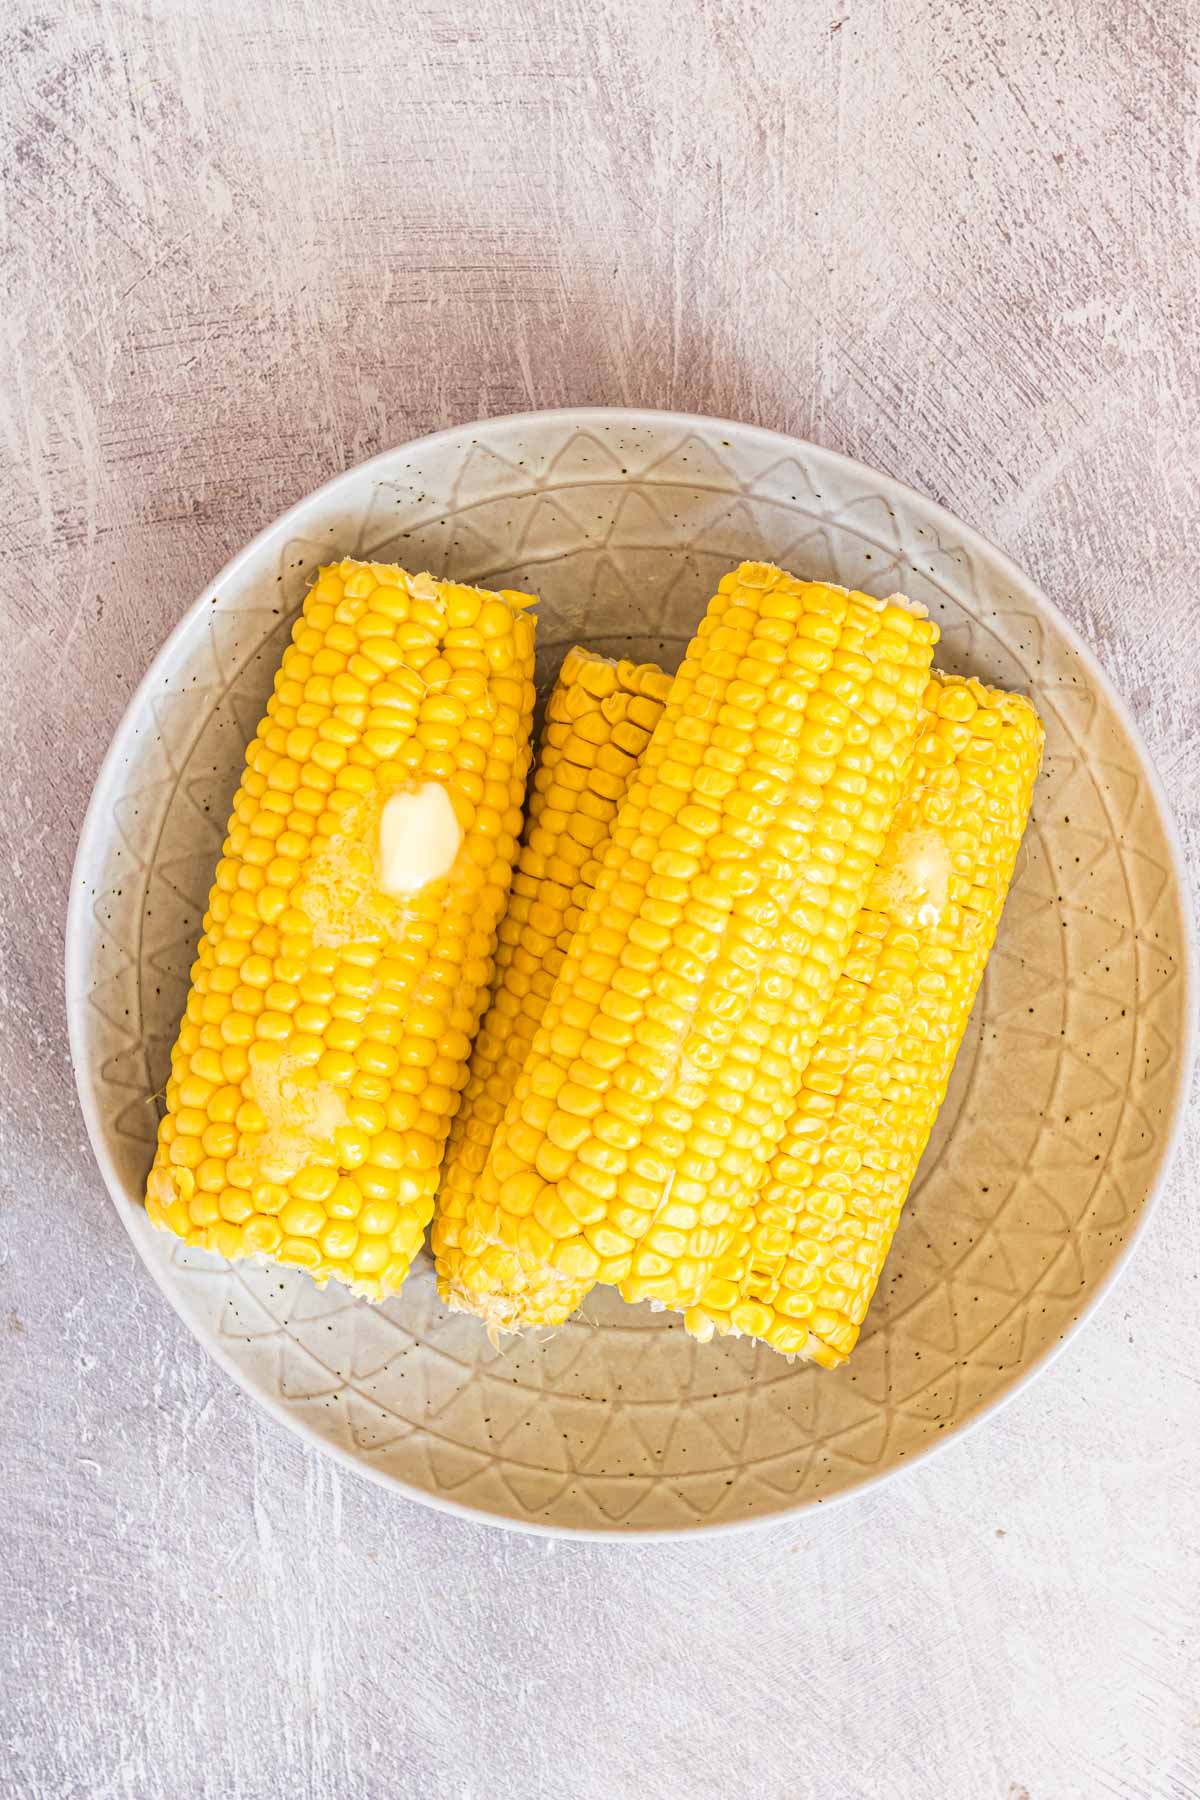 top down view of the completed microwave corn on the cob topped with butter